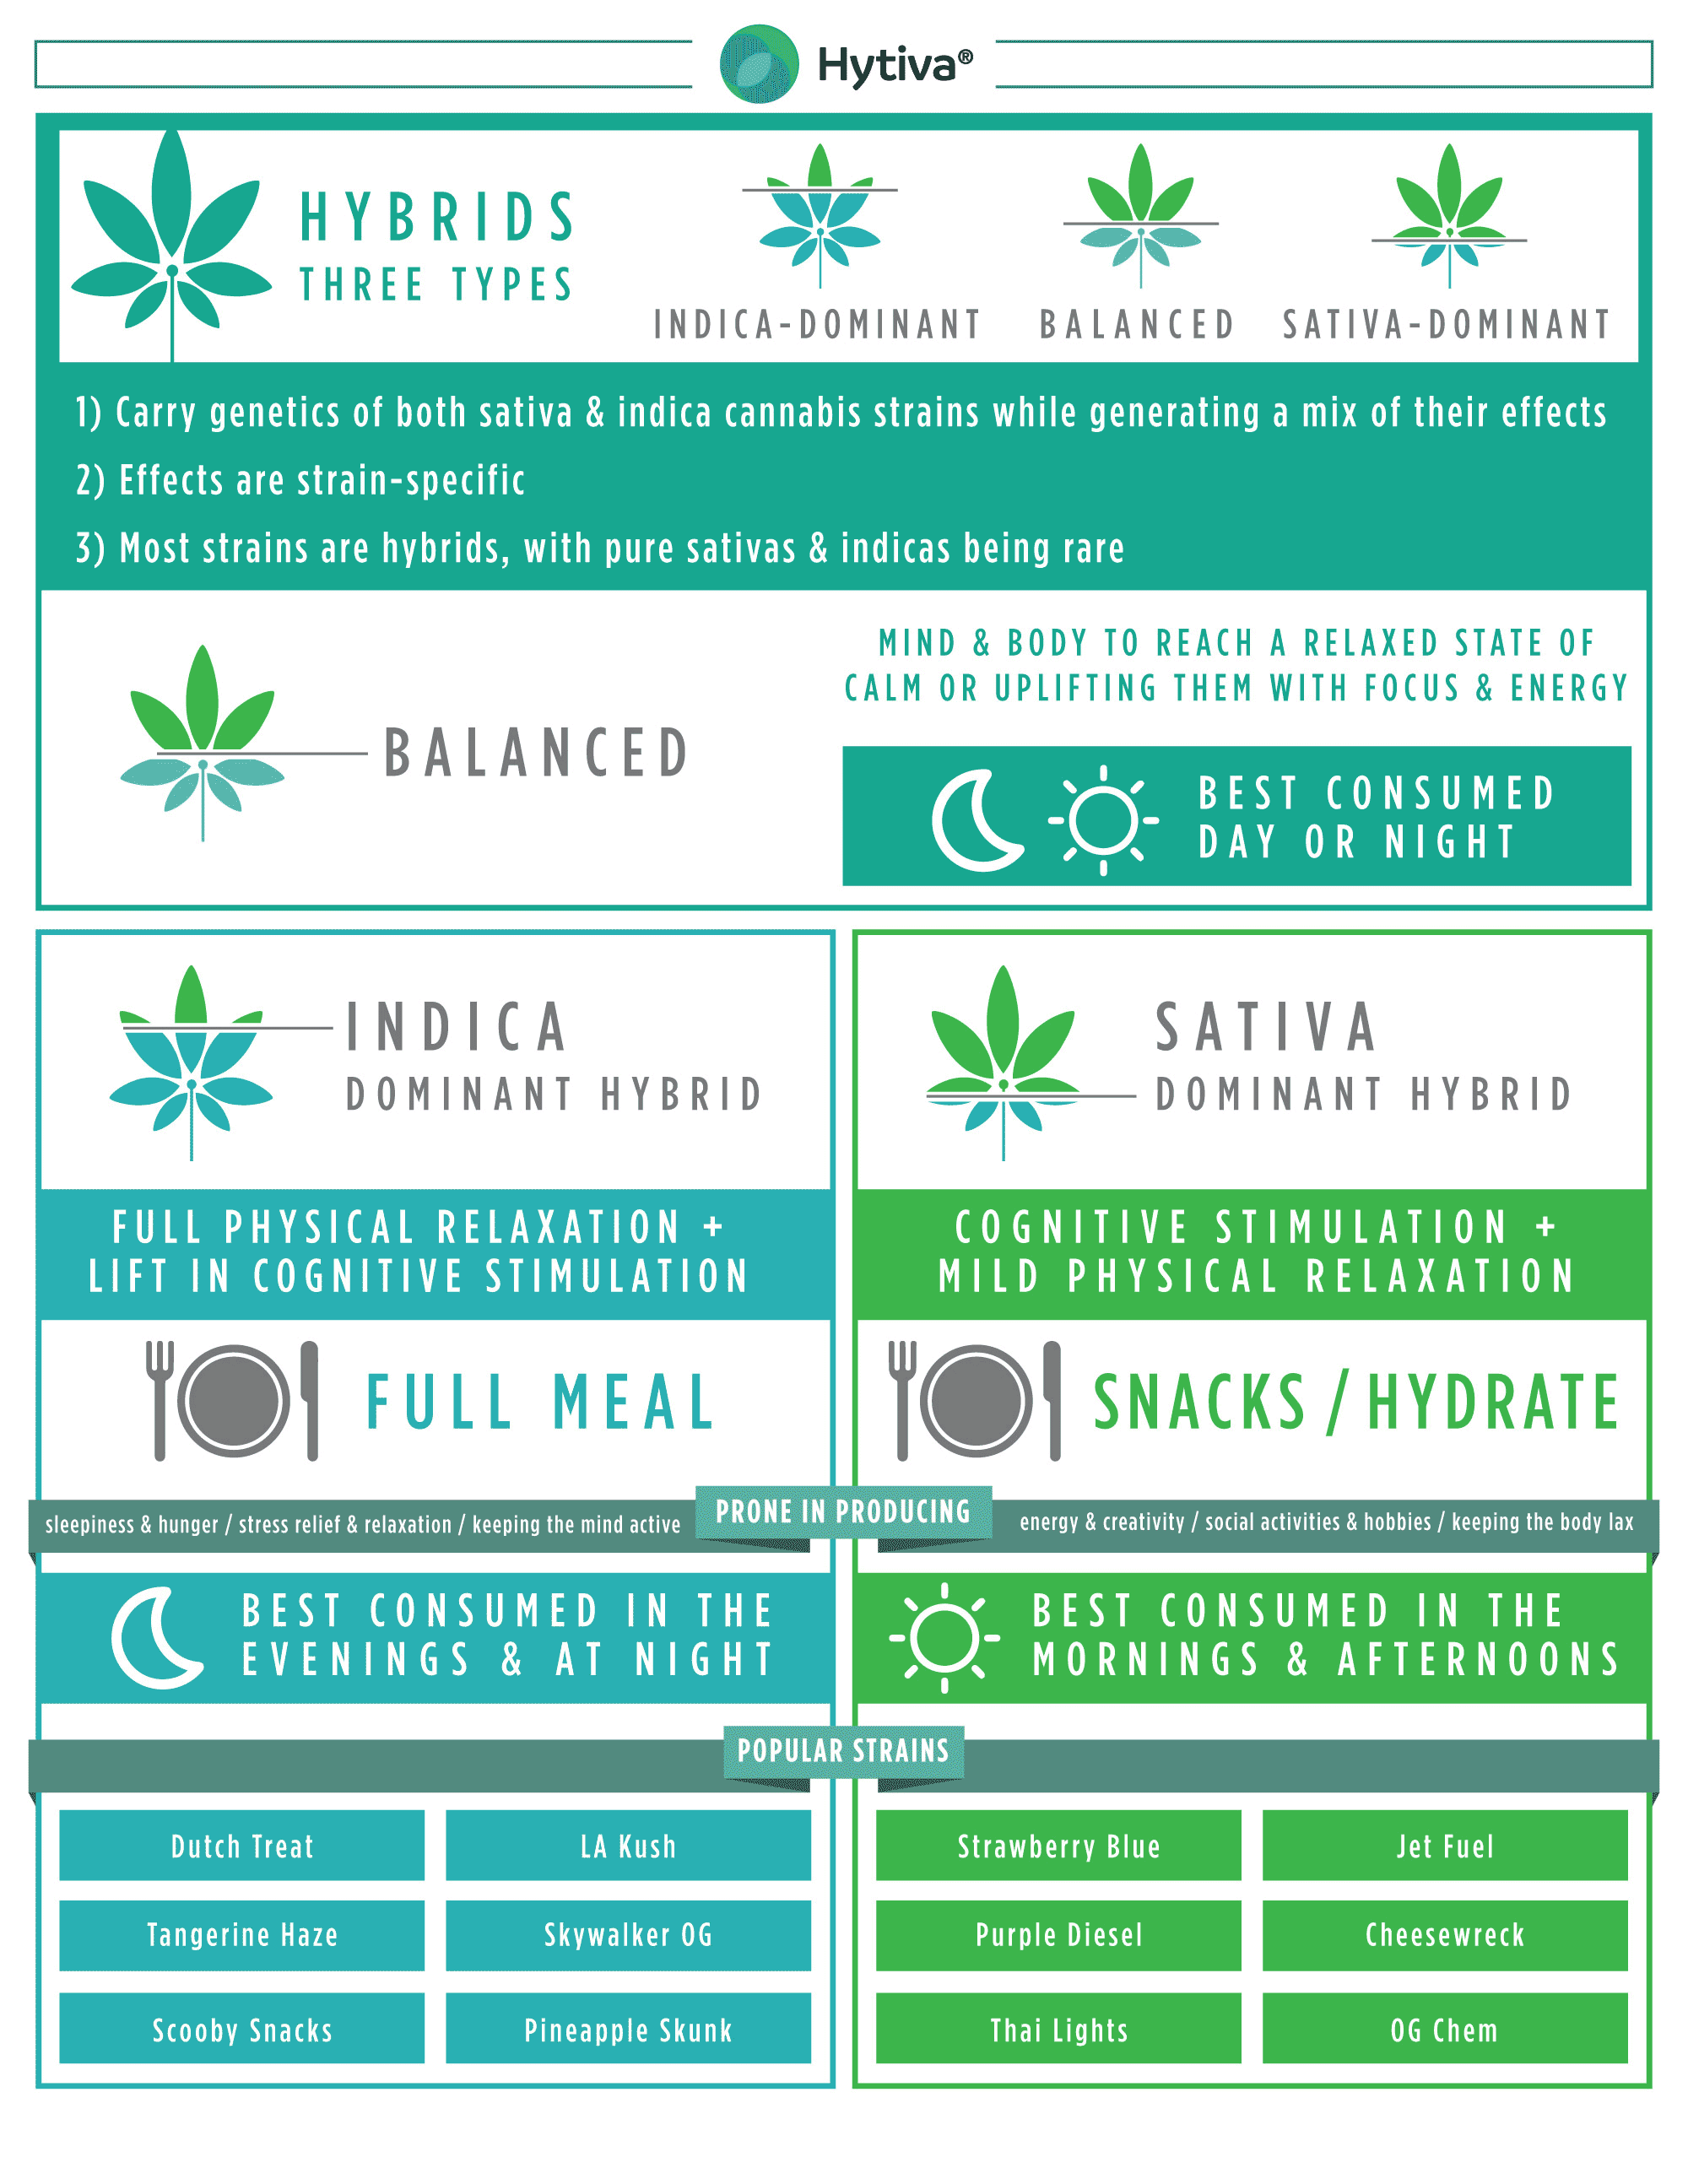 The Hytivac info graphic explains the differences between 3 cannabis hybrids, indica-dominant, balanced and sativa-dominant.